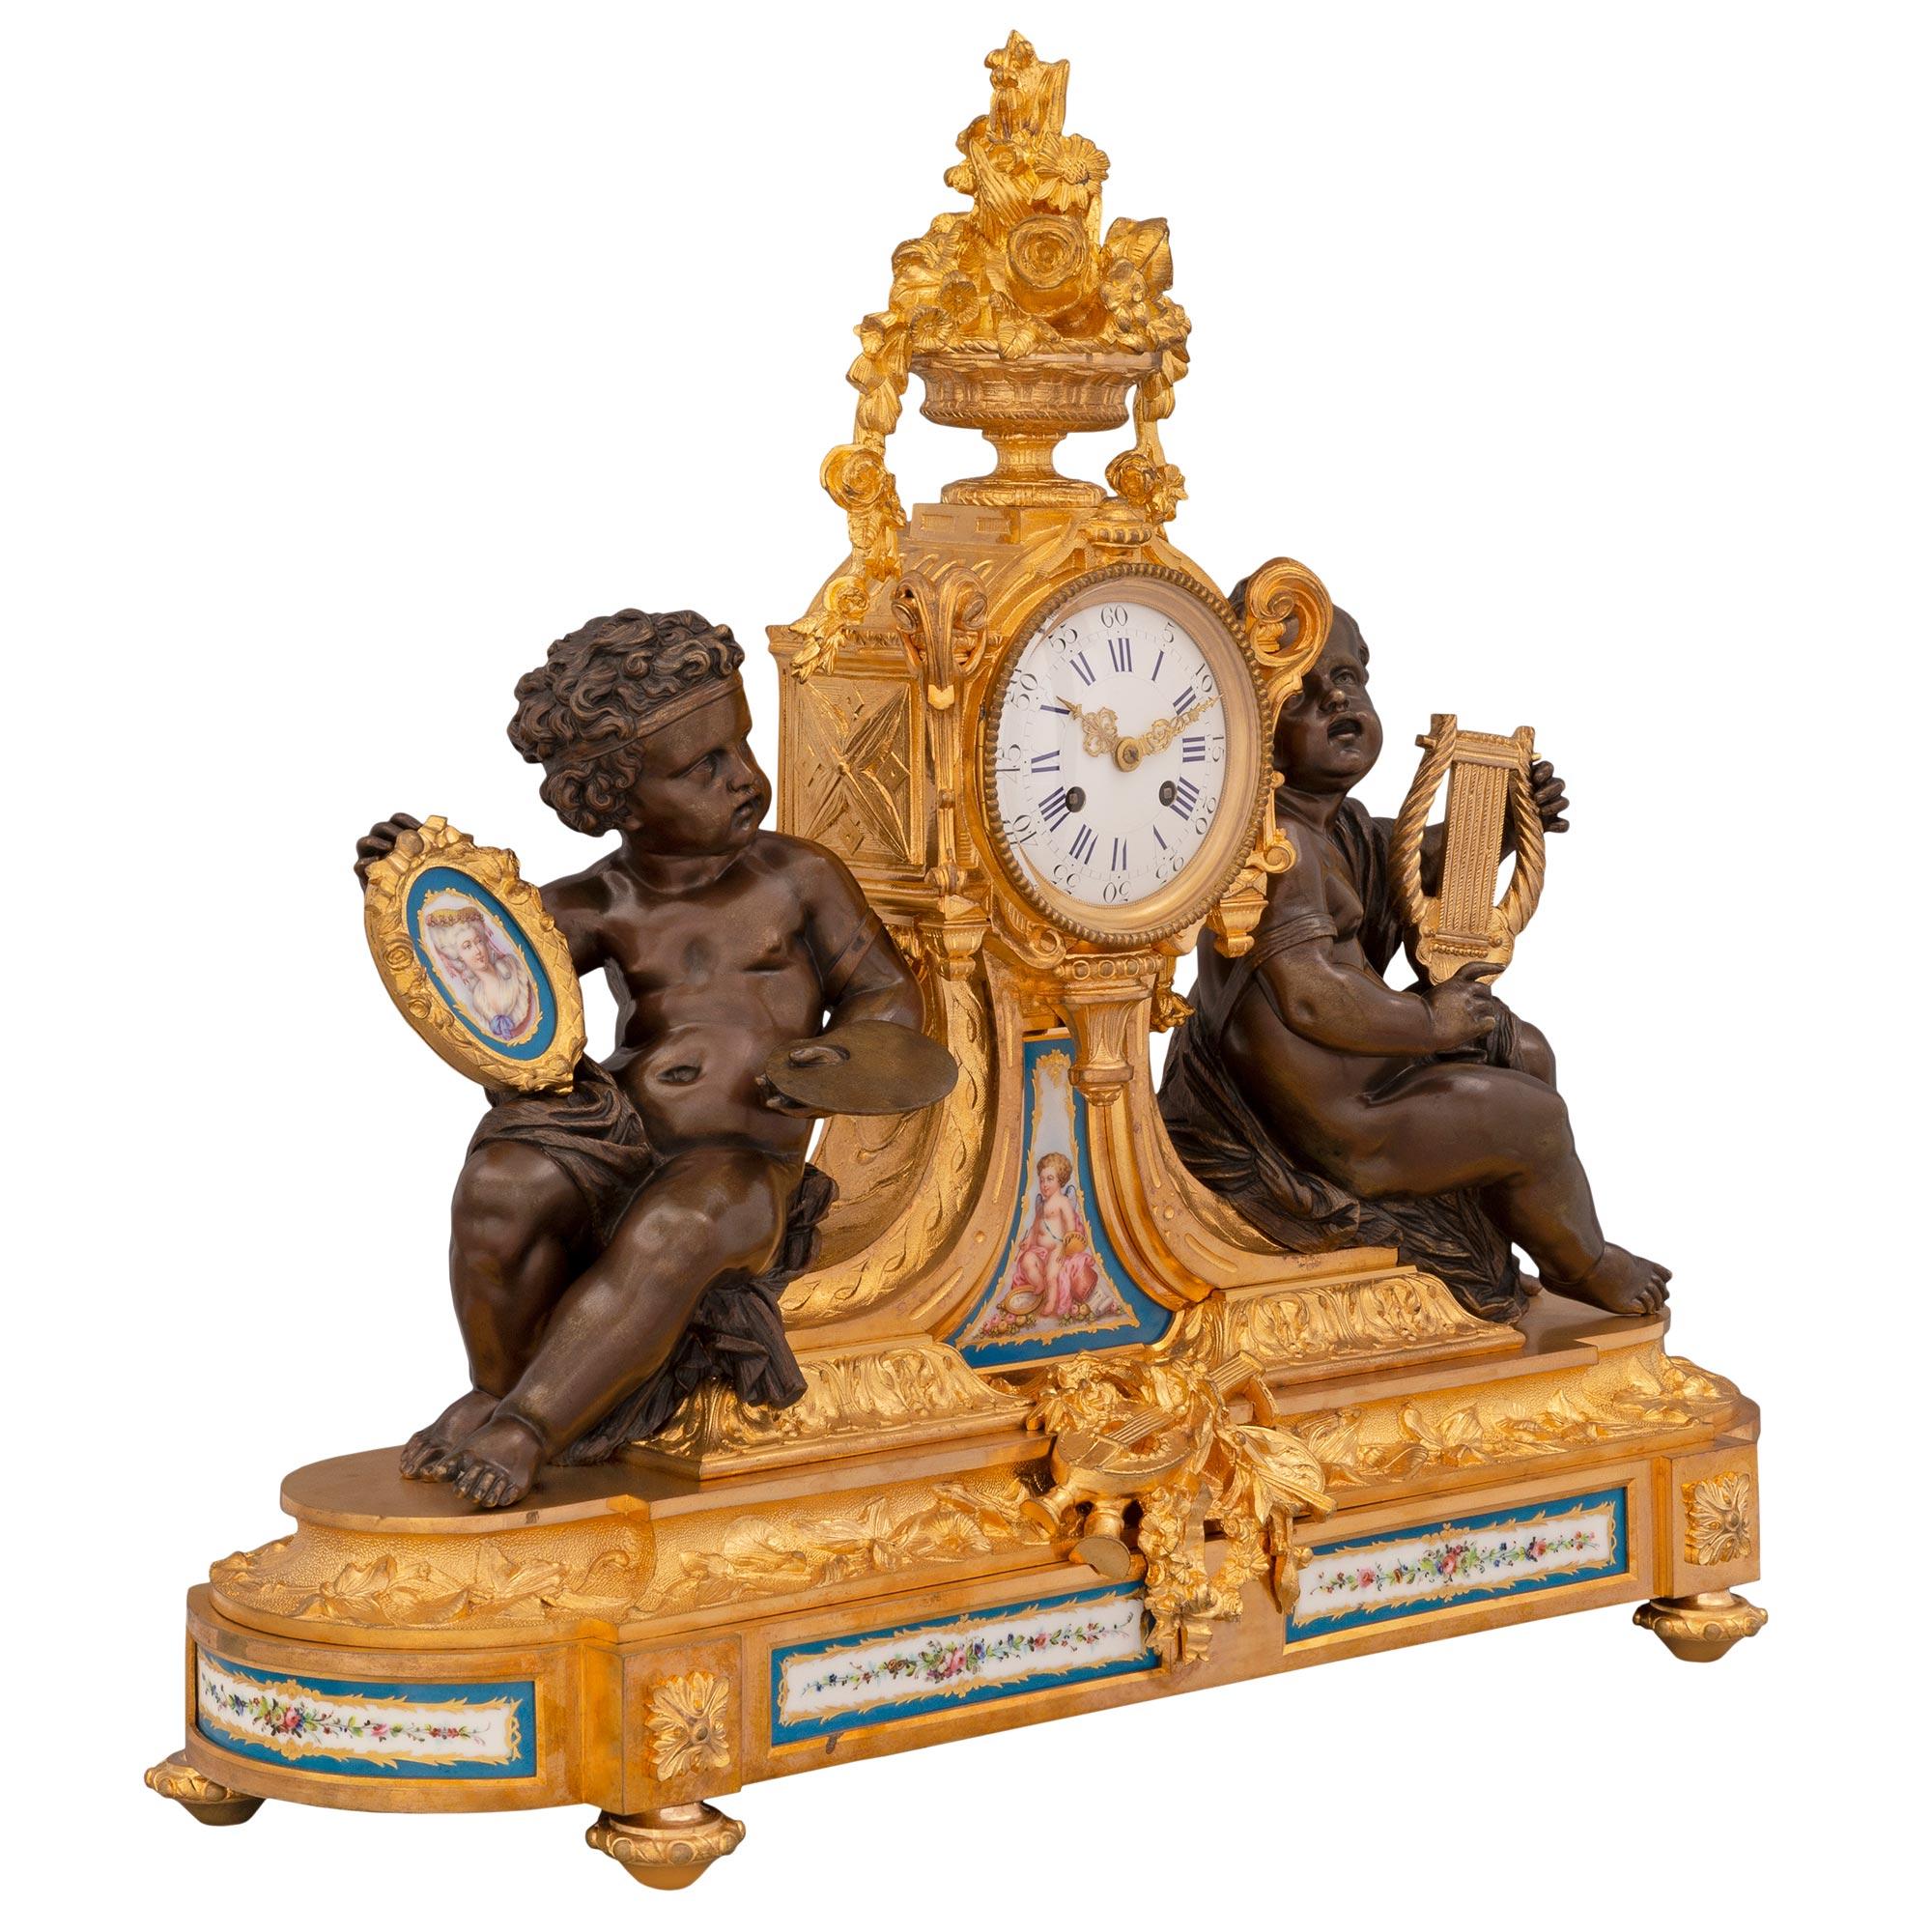 A magnificent French 19th century Louis XVI st. Sèvres porcelain and ormolu clock. The clock is raised by fine topie shaped feet below the ormolu base which is decorated with elegant block rosettes above each foot and beautiful fitted Sèvres